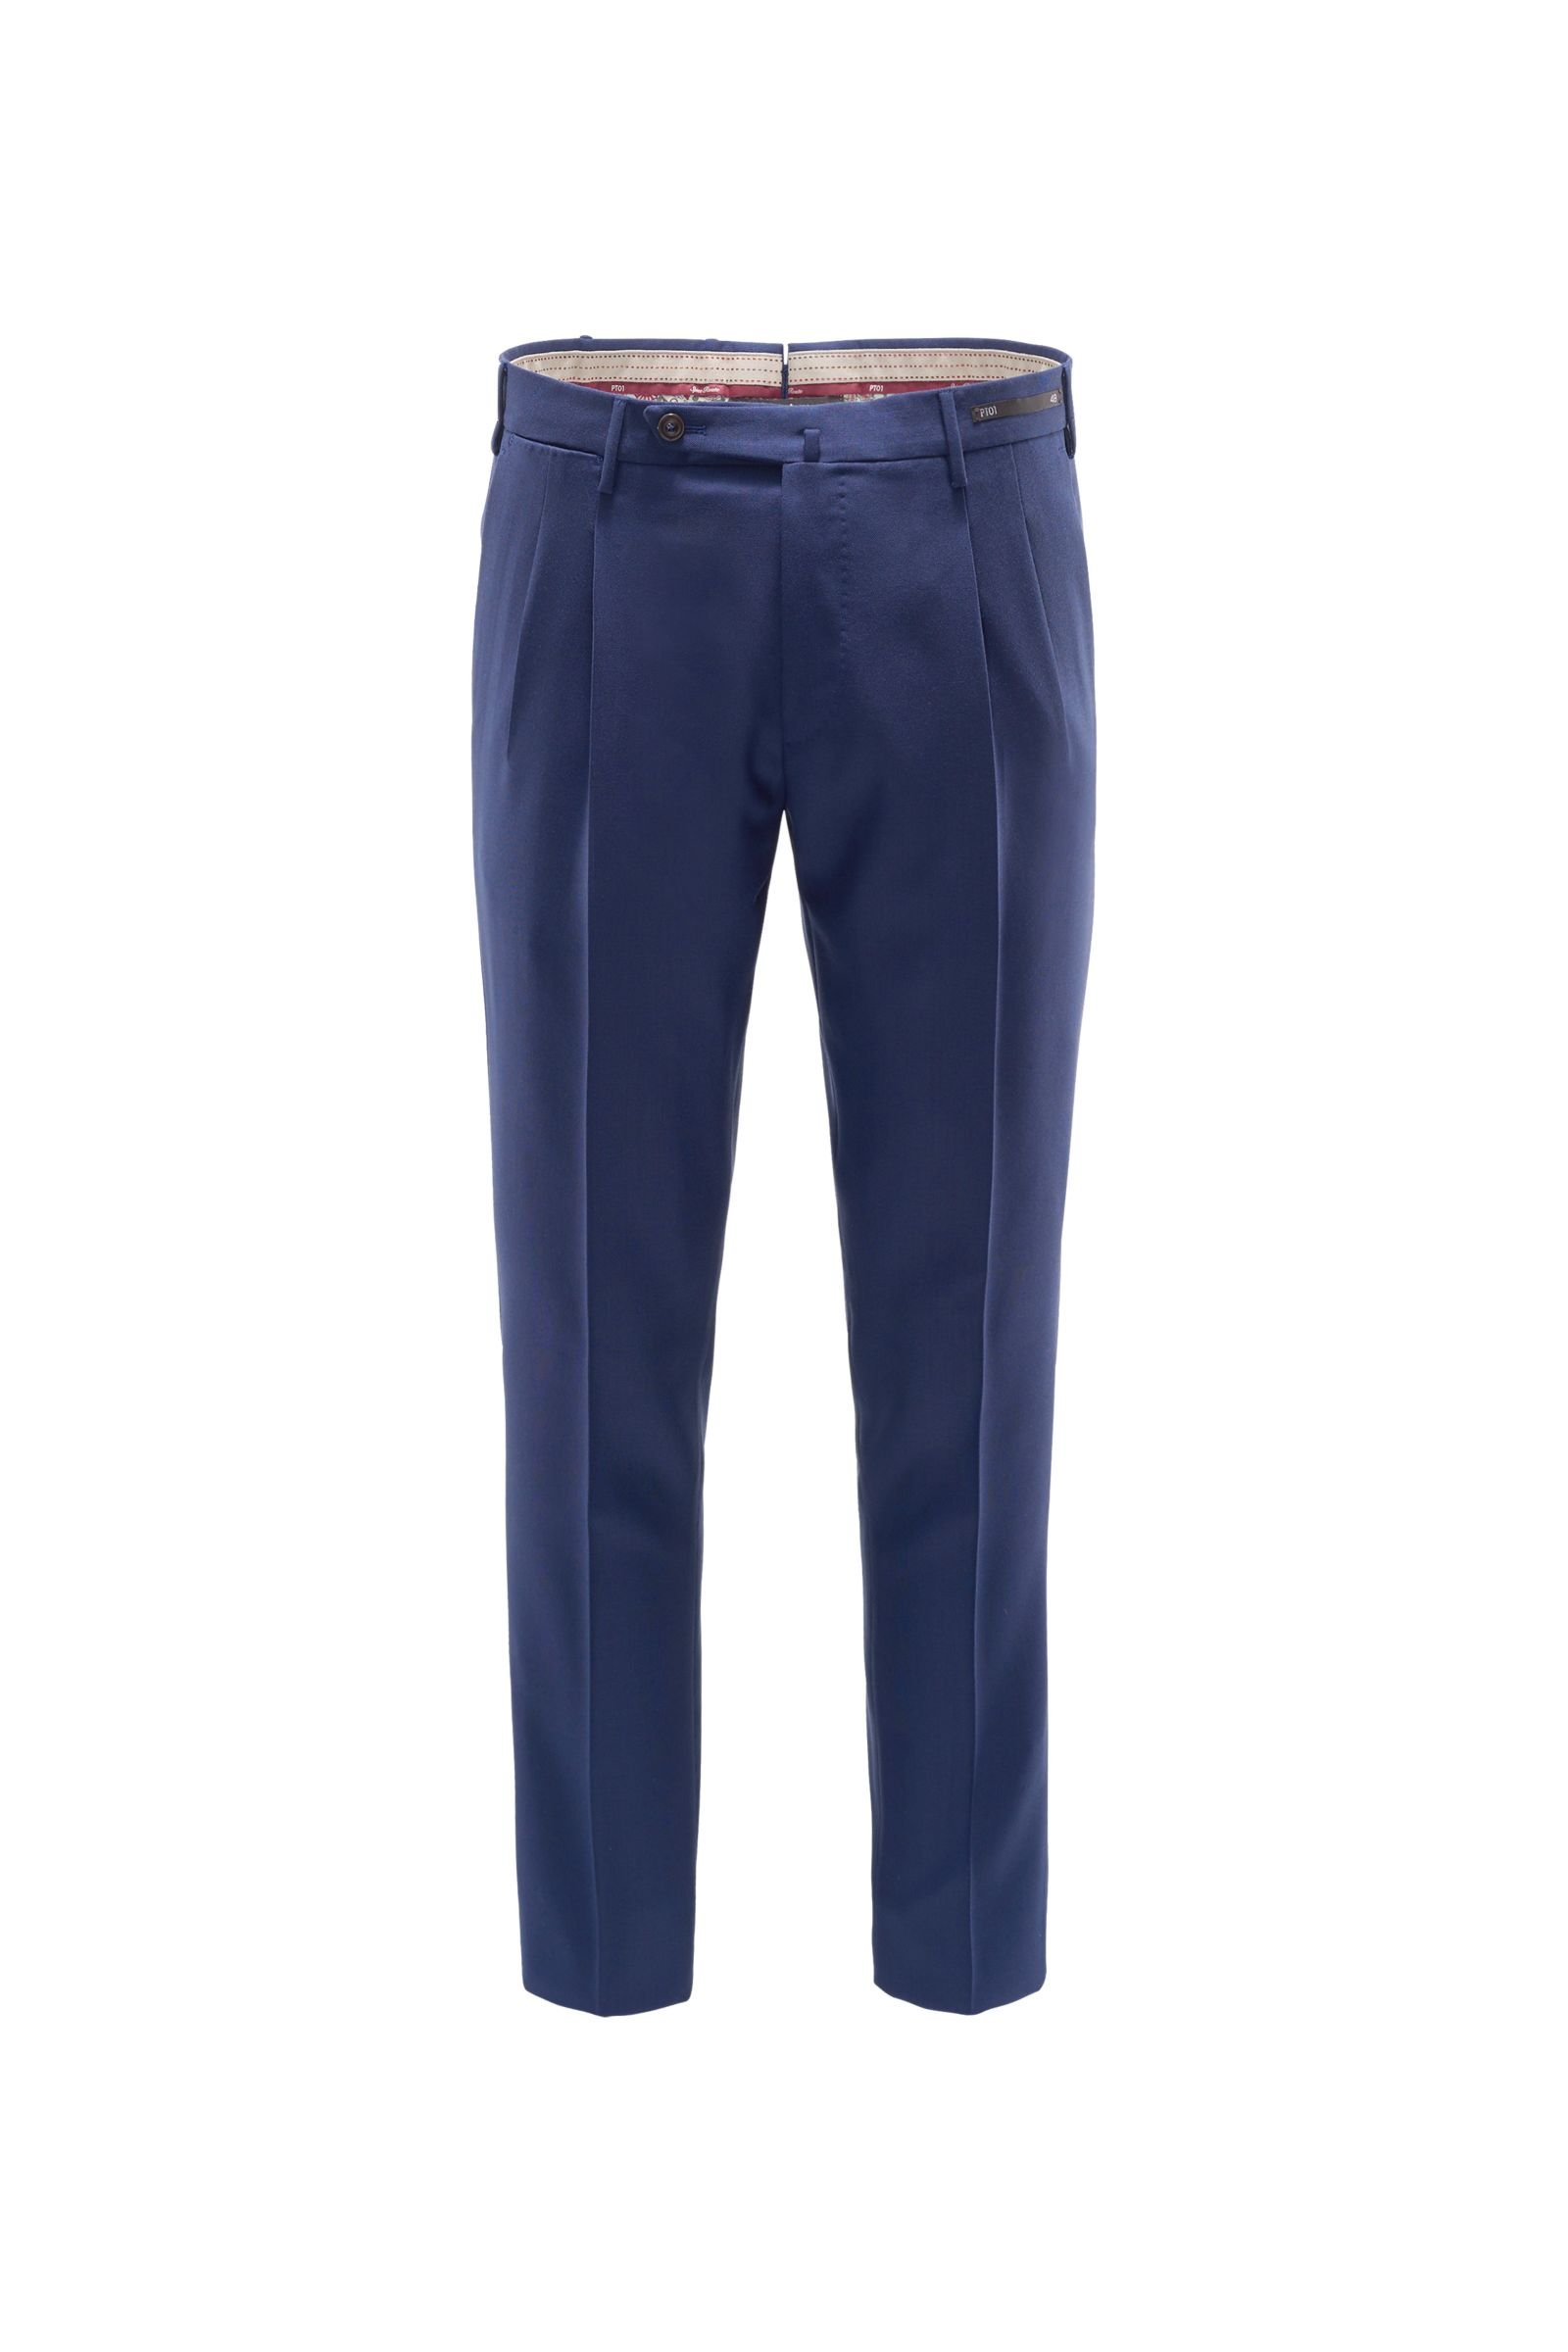 Wool trousers 'Spice Route Preppy Fit' navy